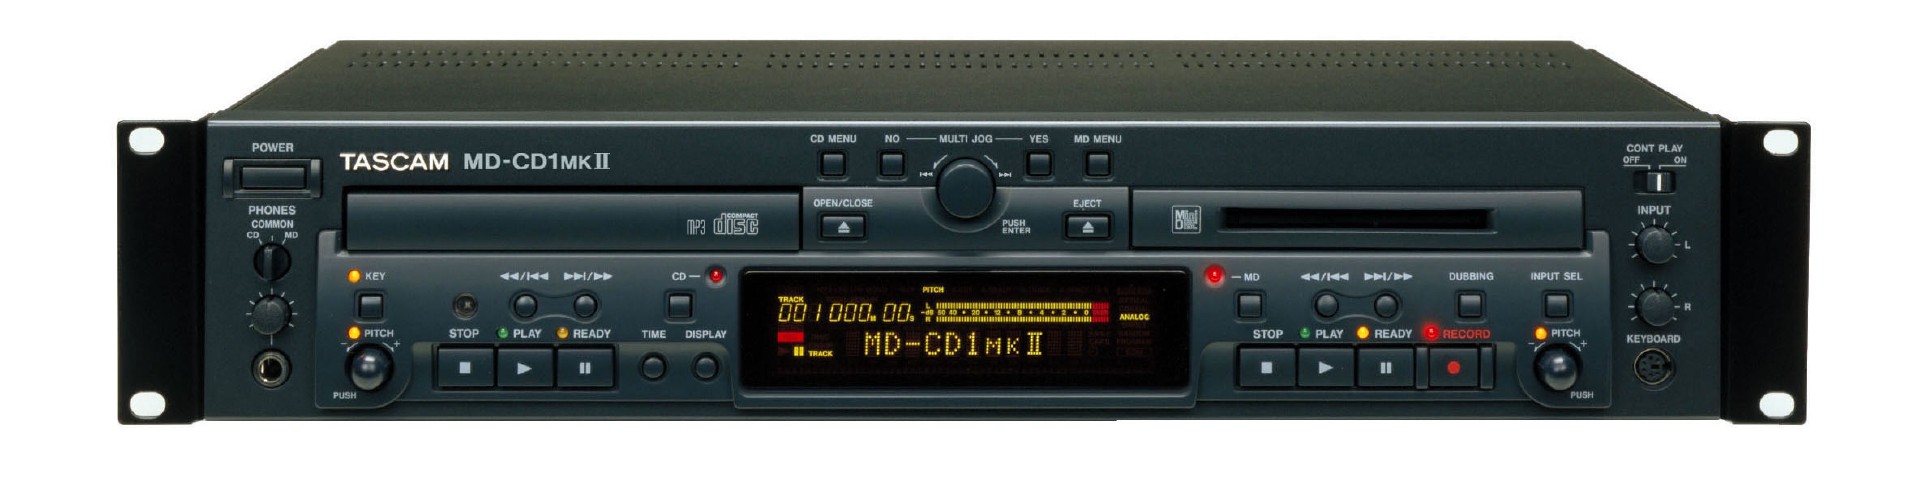 MD-CD1MKII | FEATURES | TASCAM | International Website| | FEATURES 